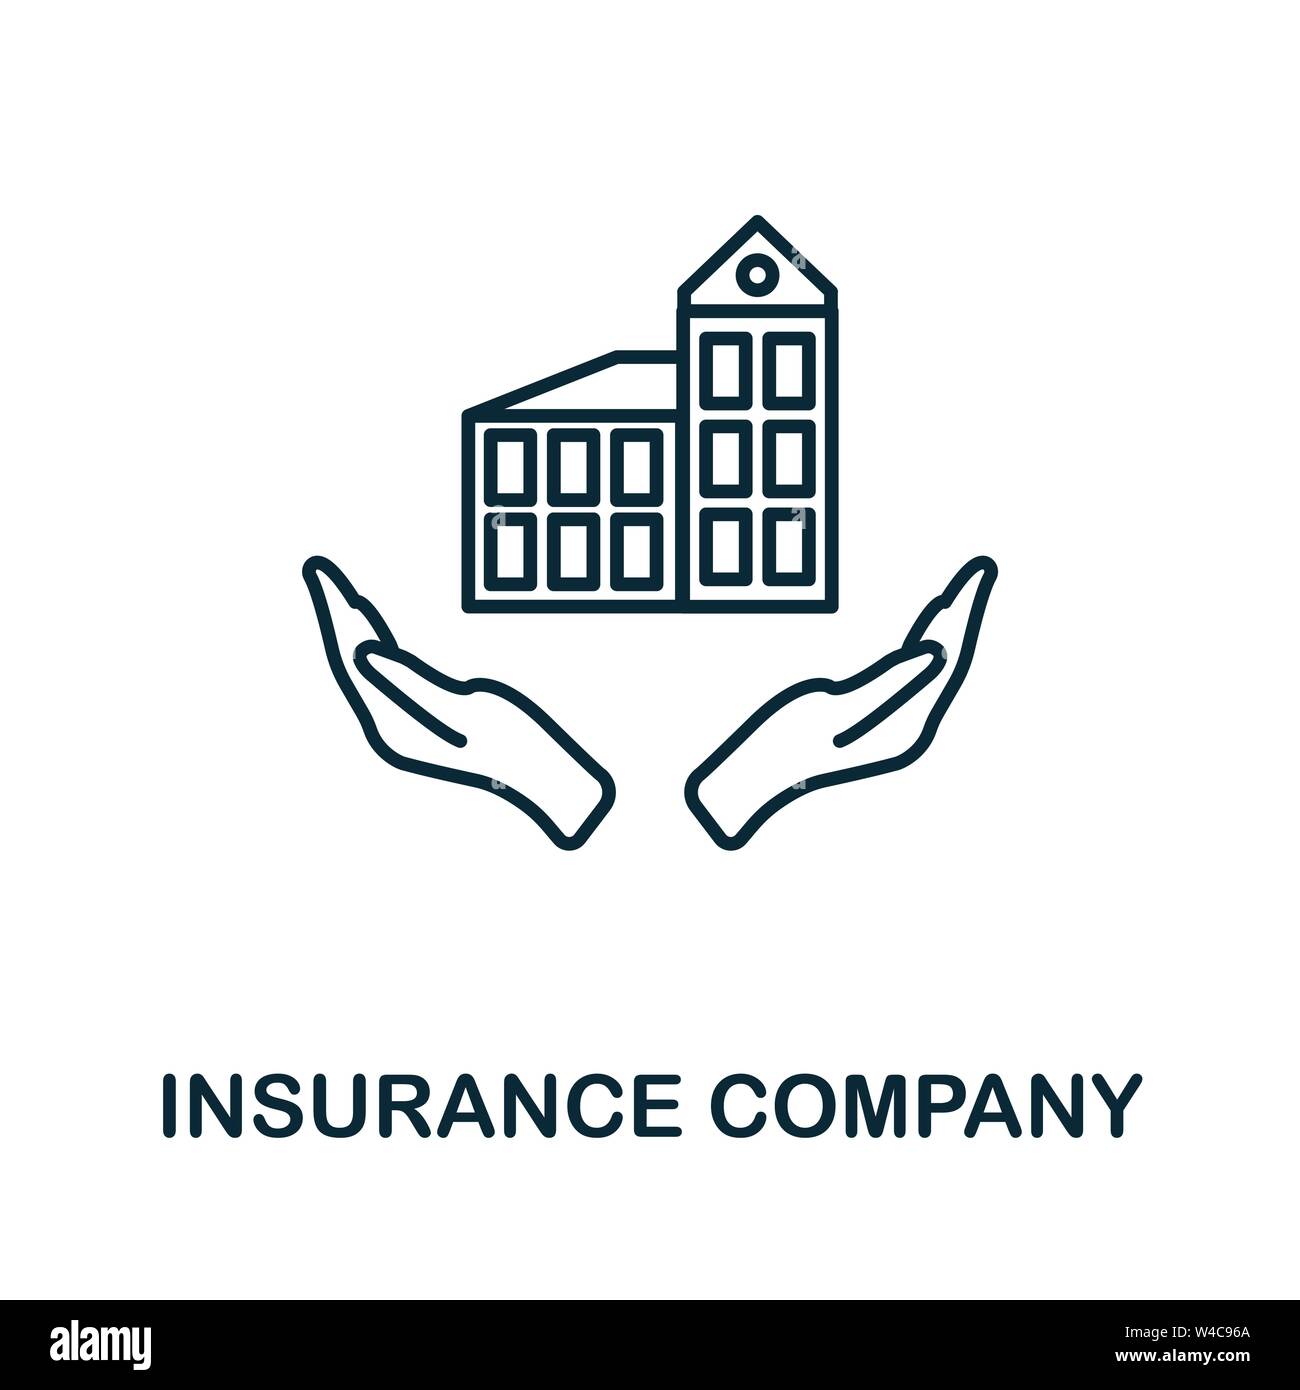 Insurance Company outline icon. Thin line style icons from insurance icons collection. Web design, apps, software and printing simple insurance Stock Vector